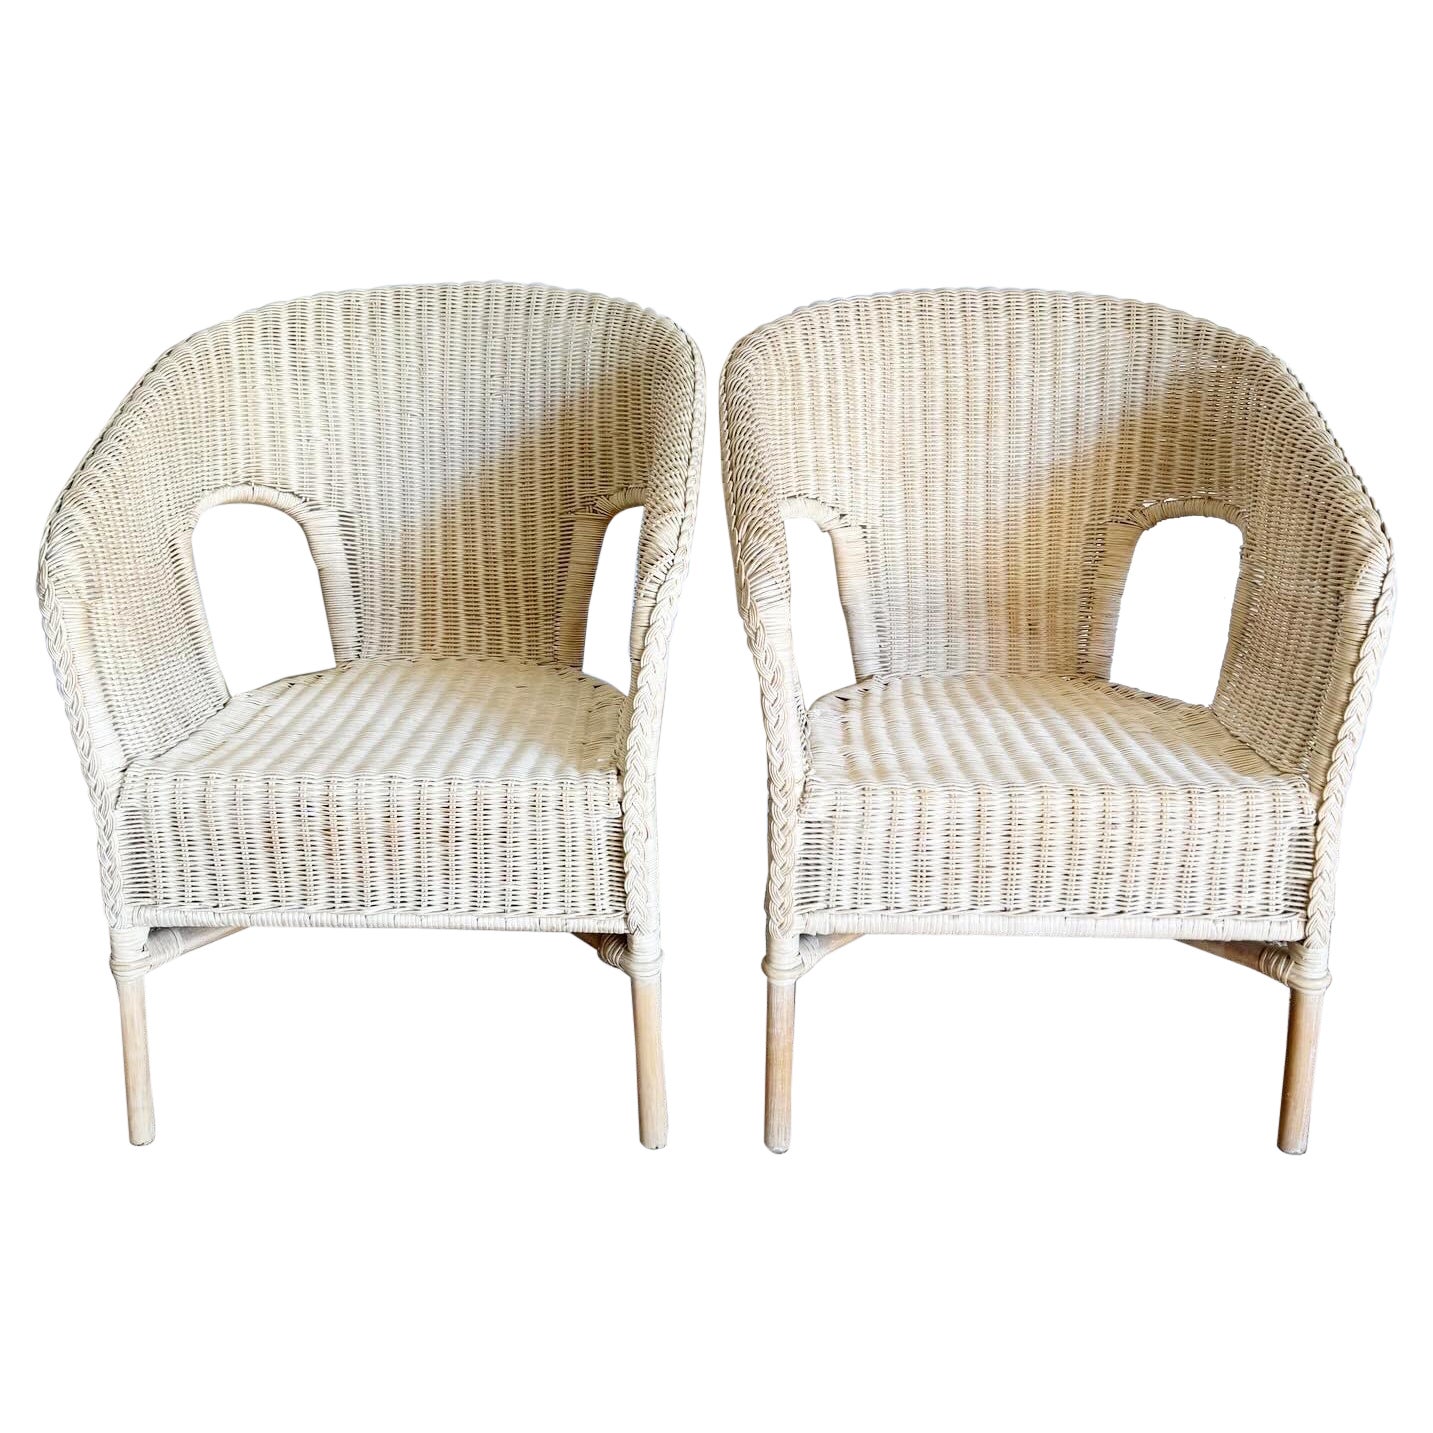 Boho Chic White Washed Wicker and Rattan Lounge Chairs - a Pair For Sale